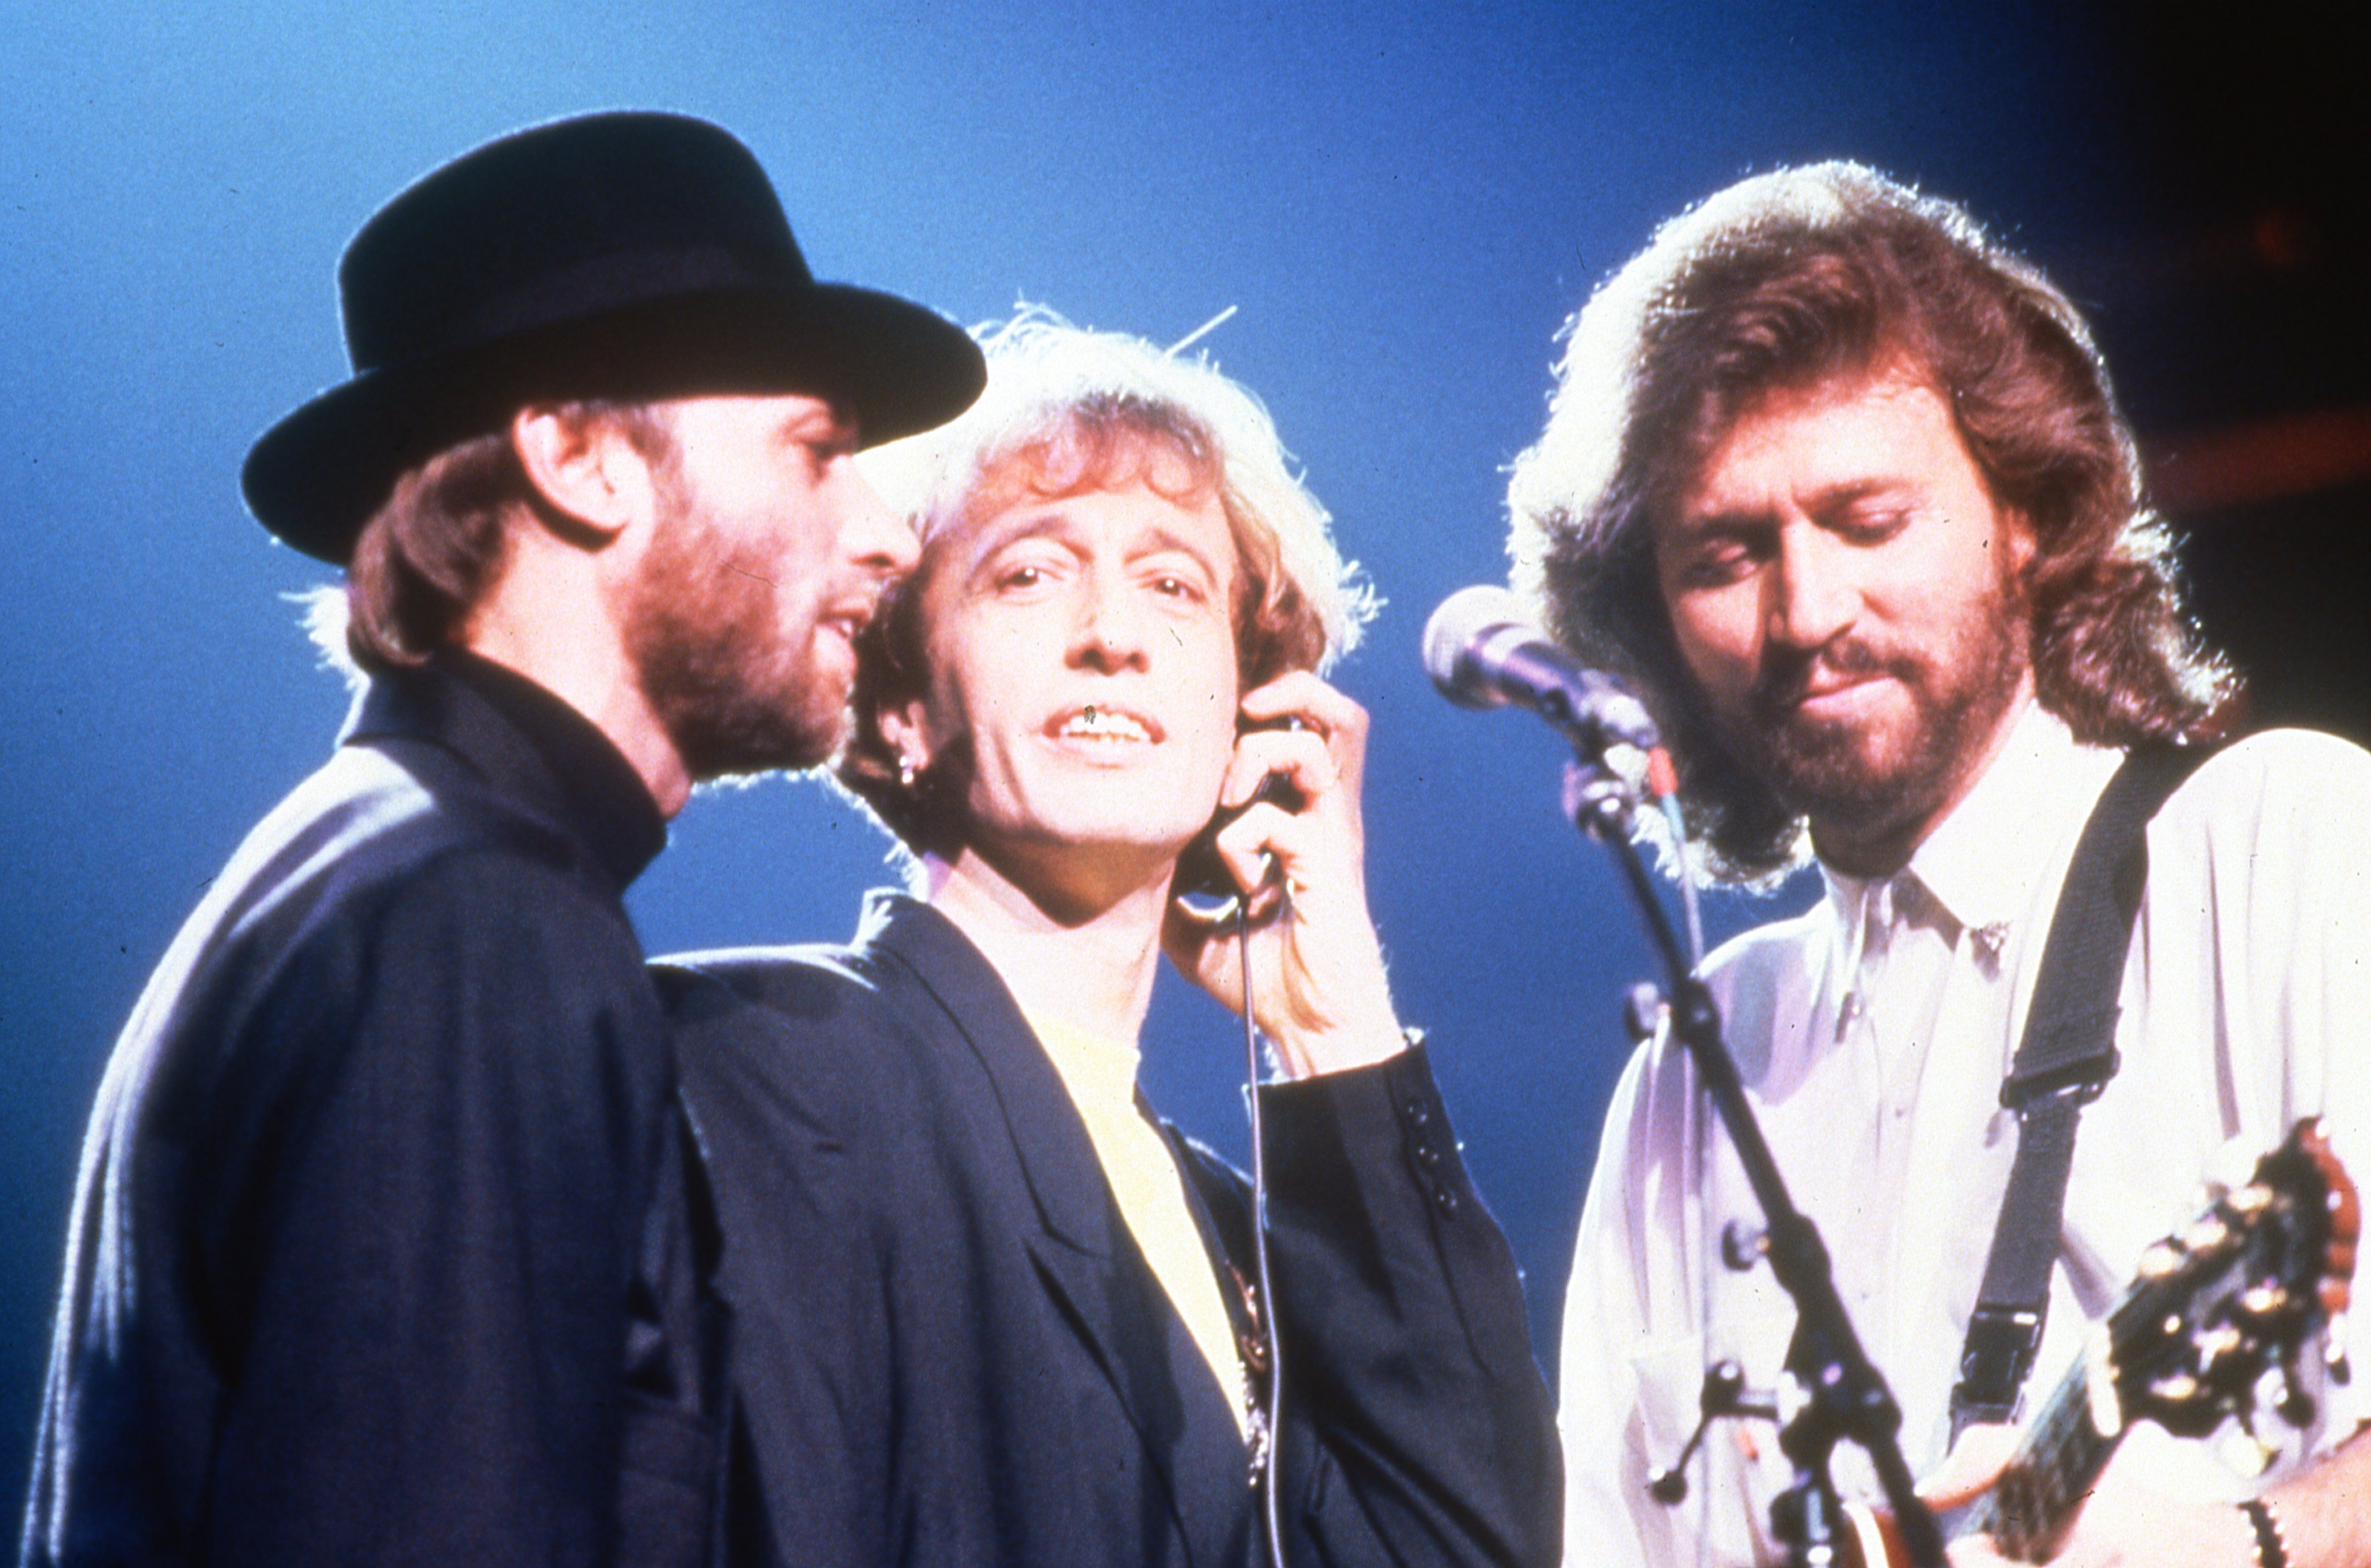 Bee Gees Movie In Works From Paramount, 'Bohemian Rhapsody' Producer Graham King